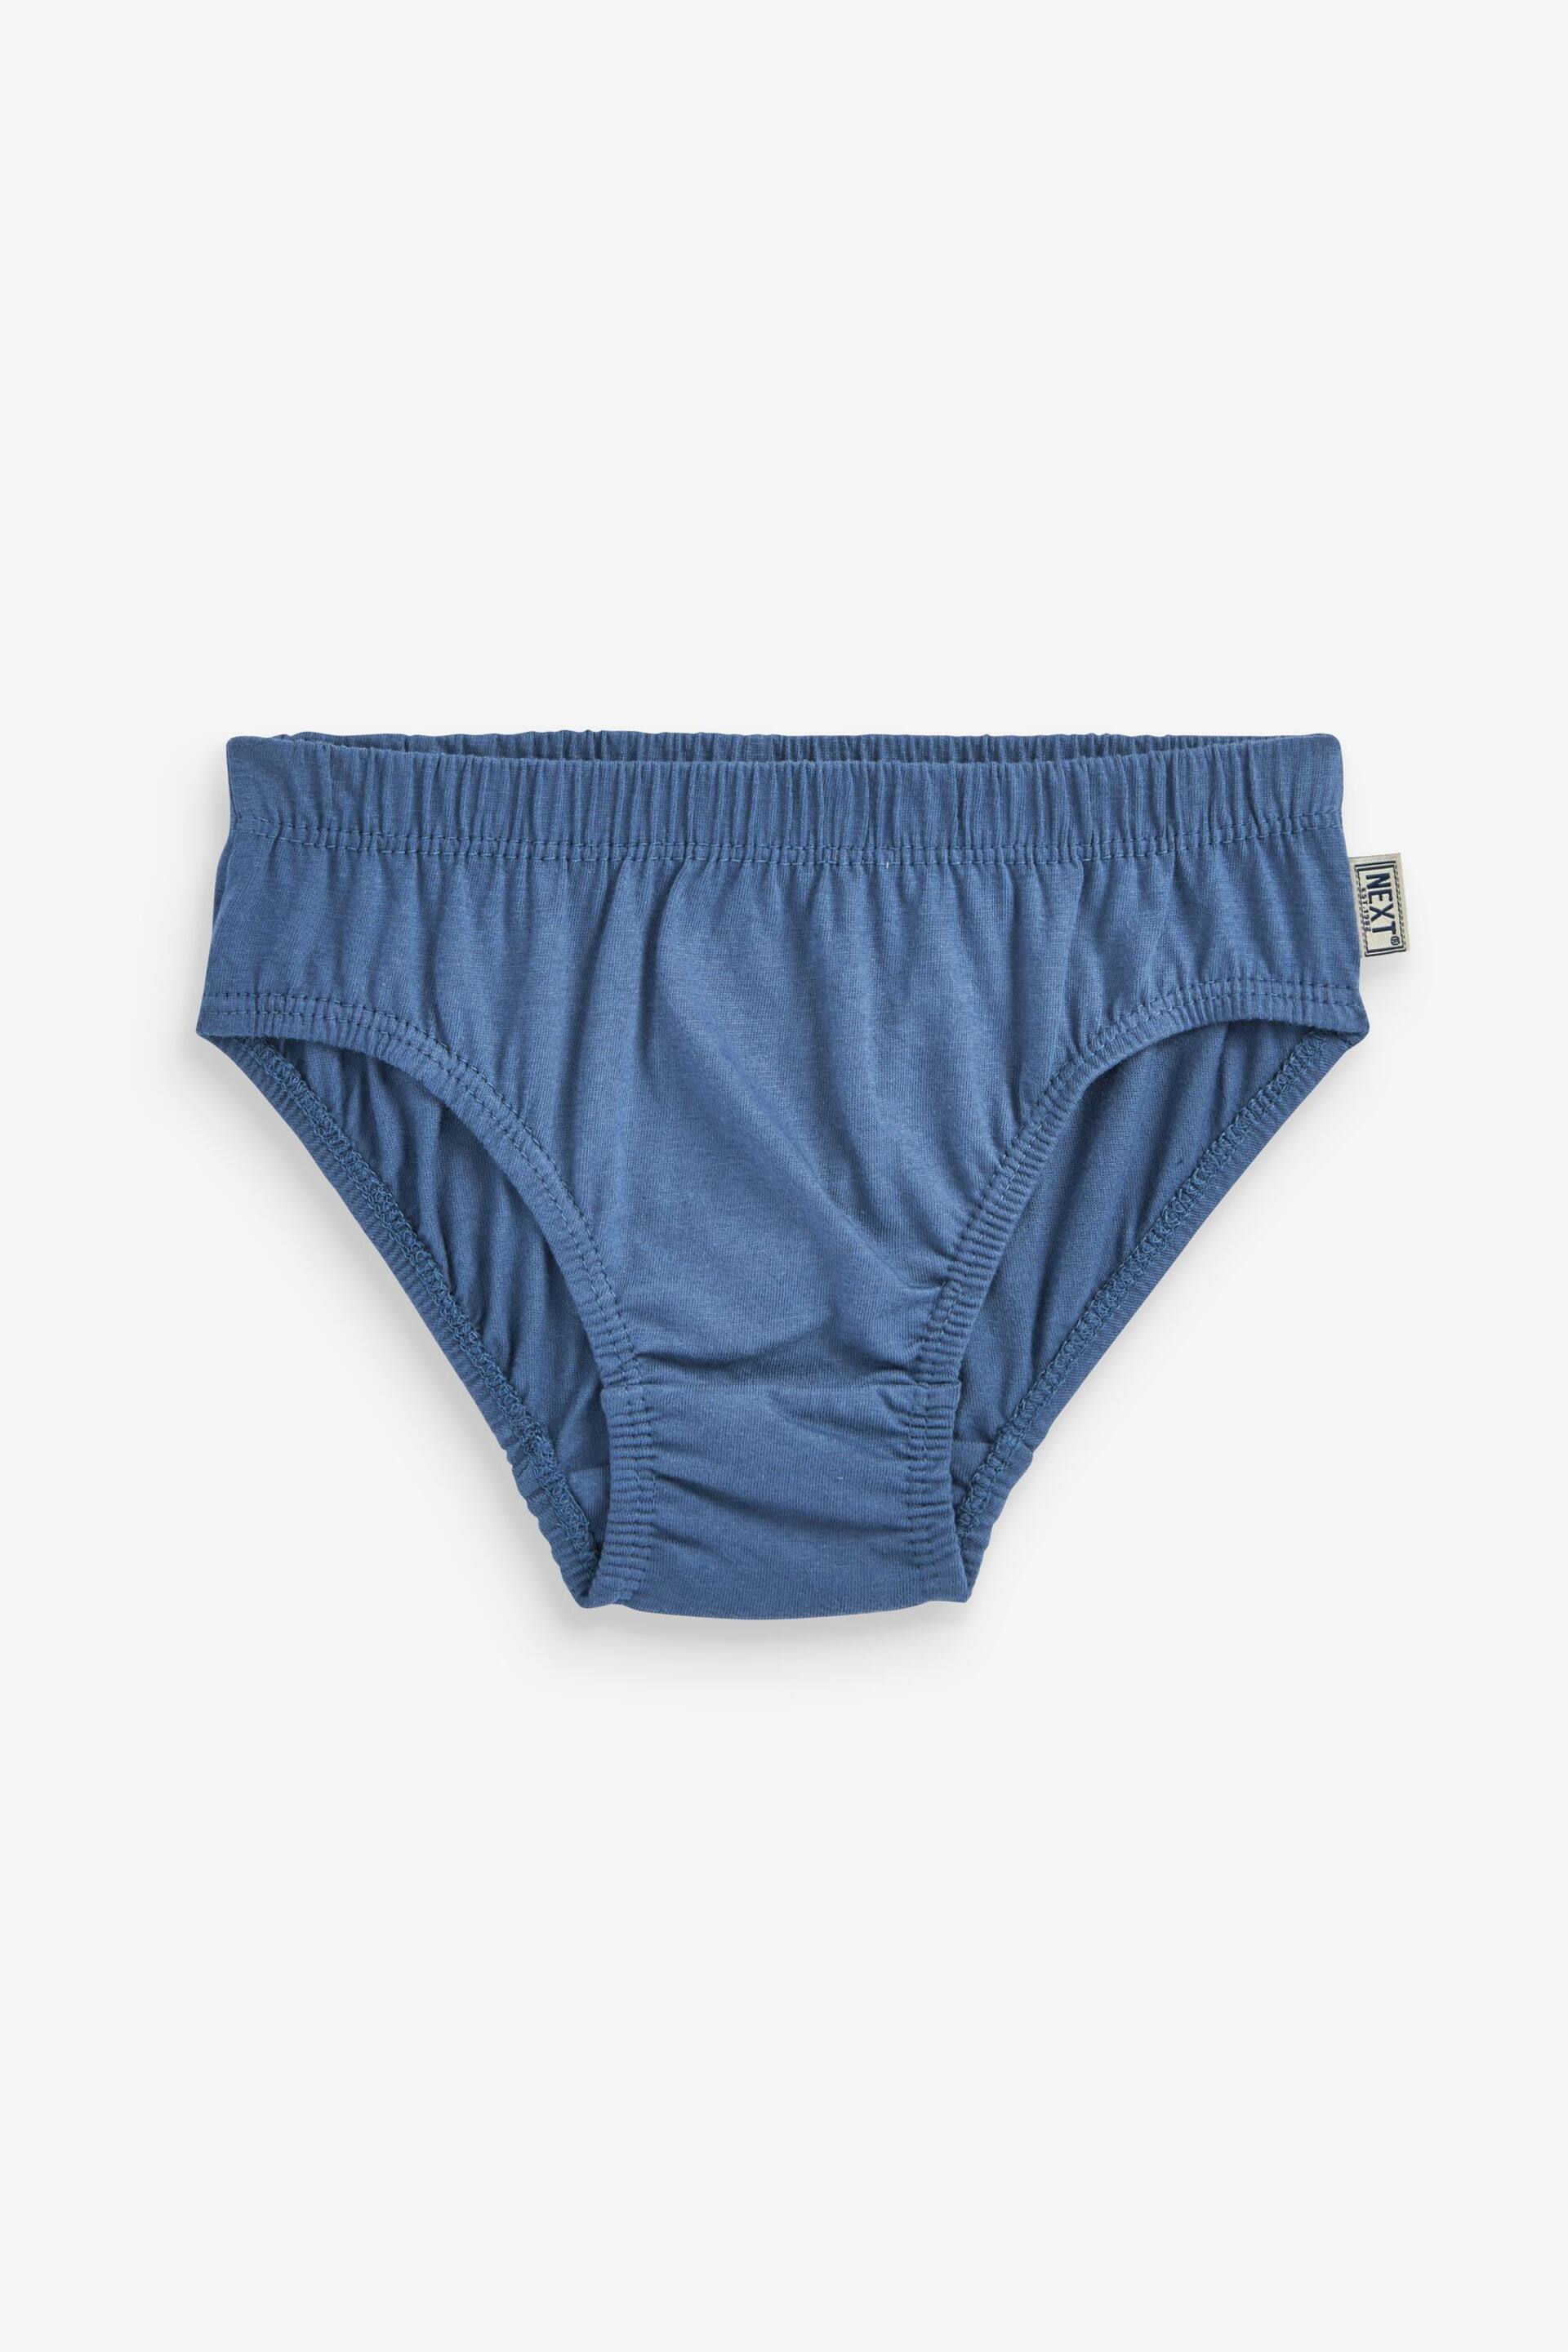 Blue Briefs 10 Pack (1.5-16yrs) - Image 2 of 12